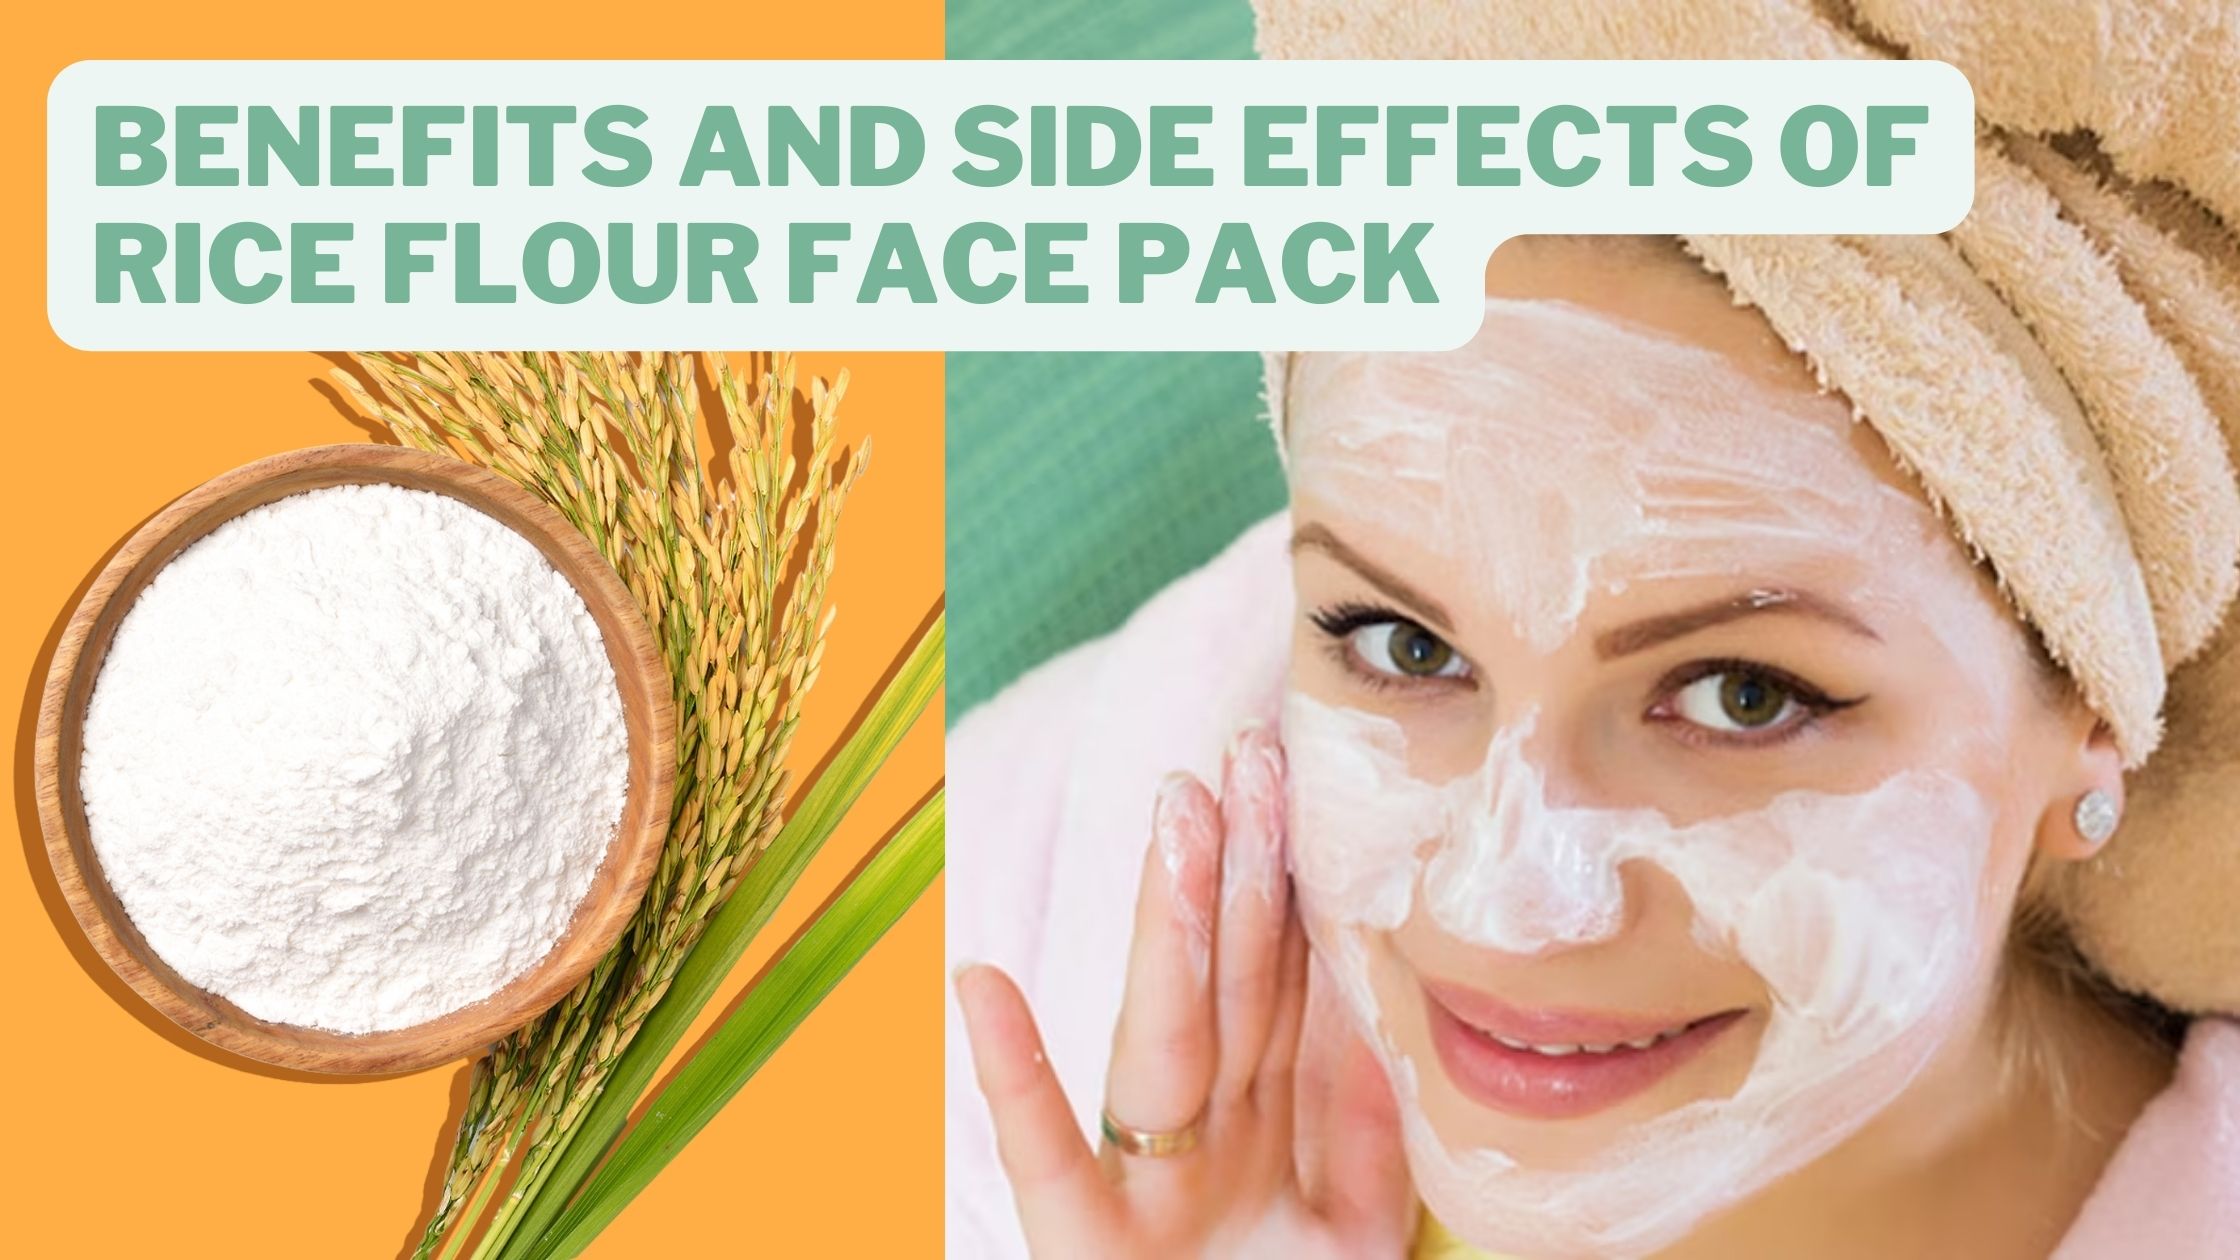 Benefits and Side Effects of Using Rice Flour Face Pack for Achieving Glowing Skin